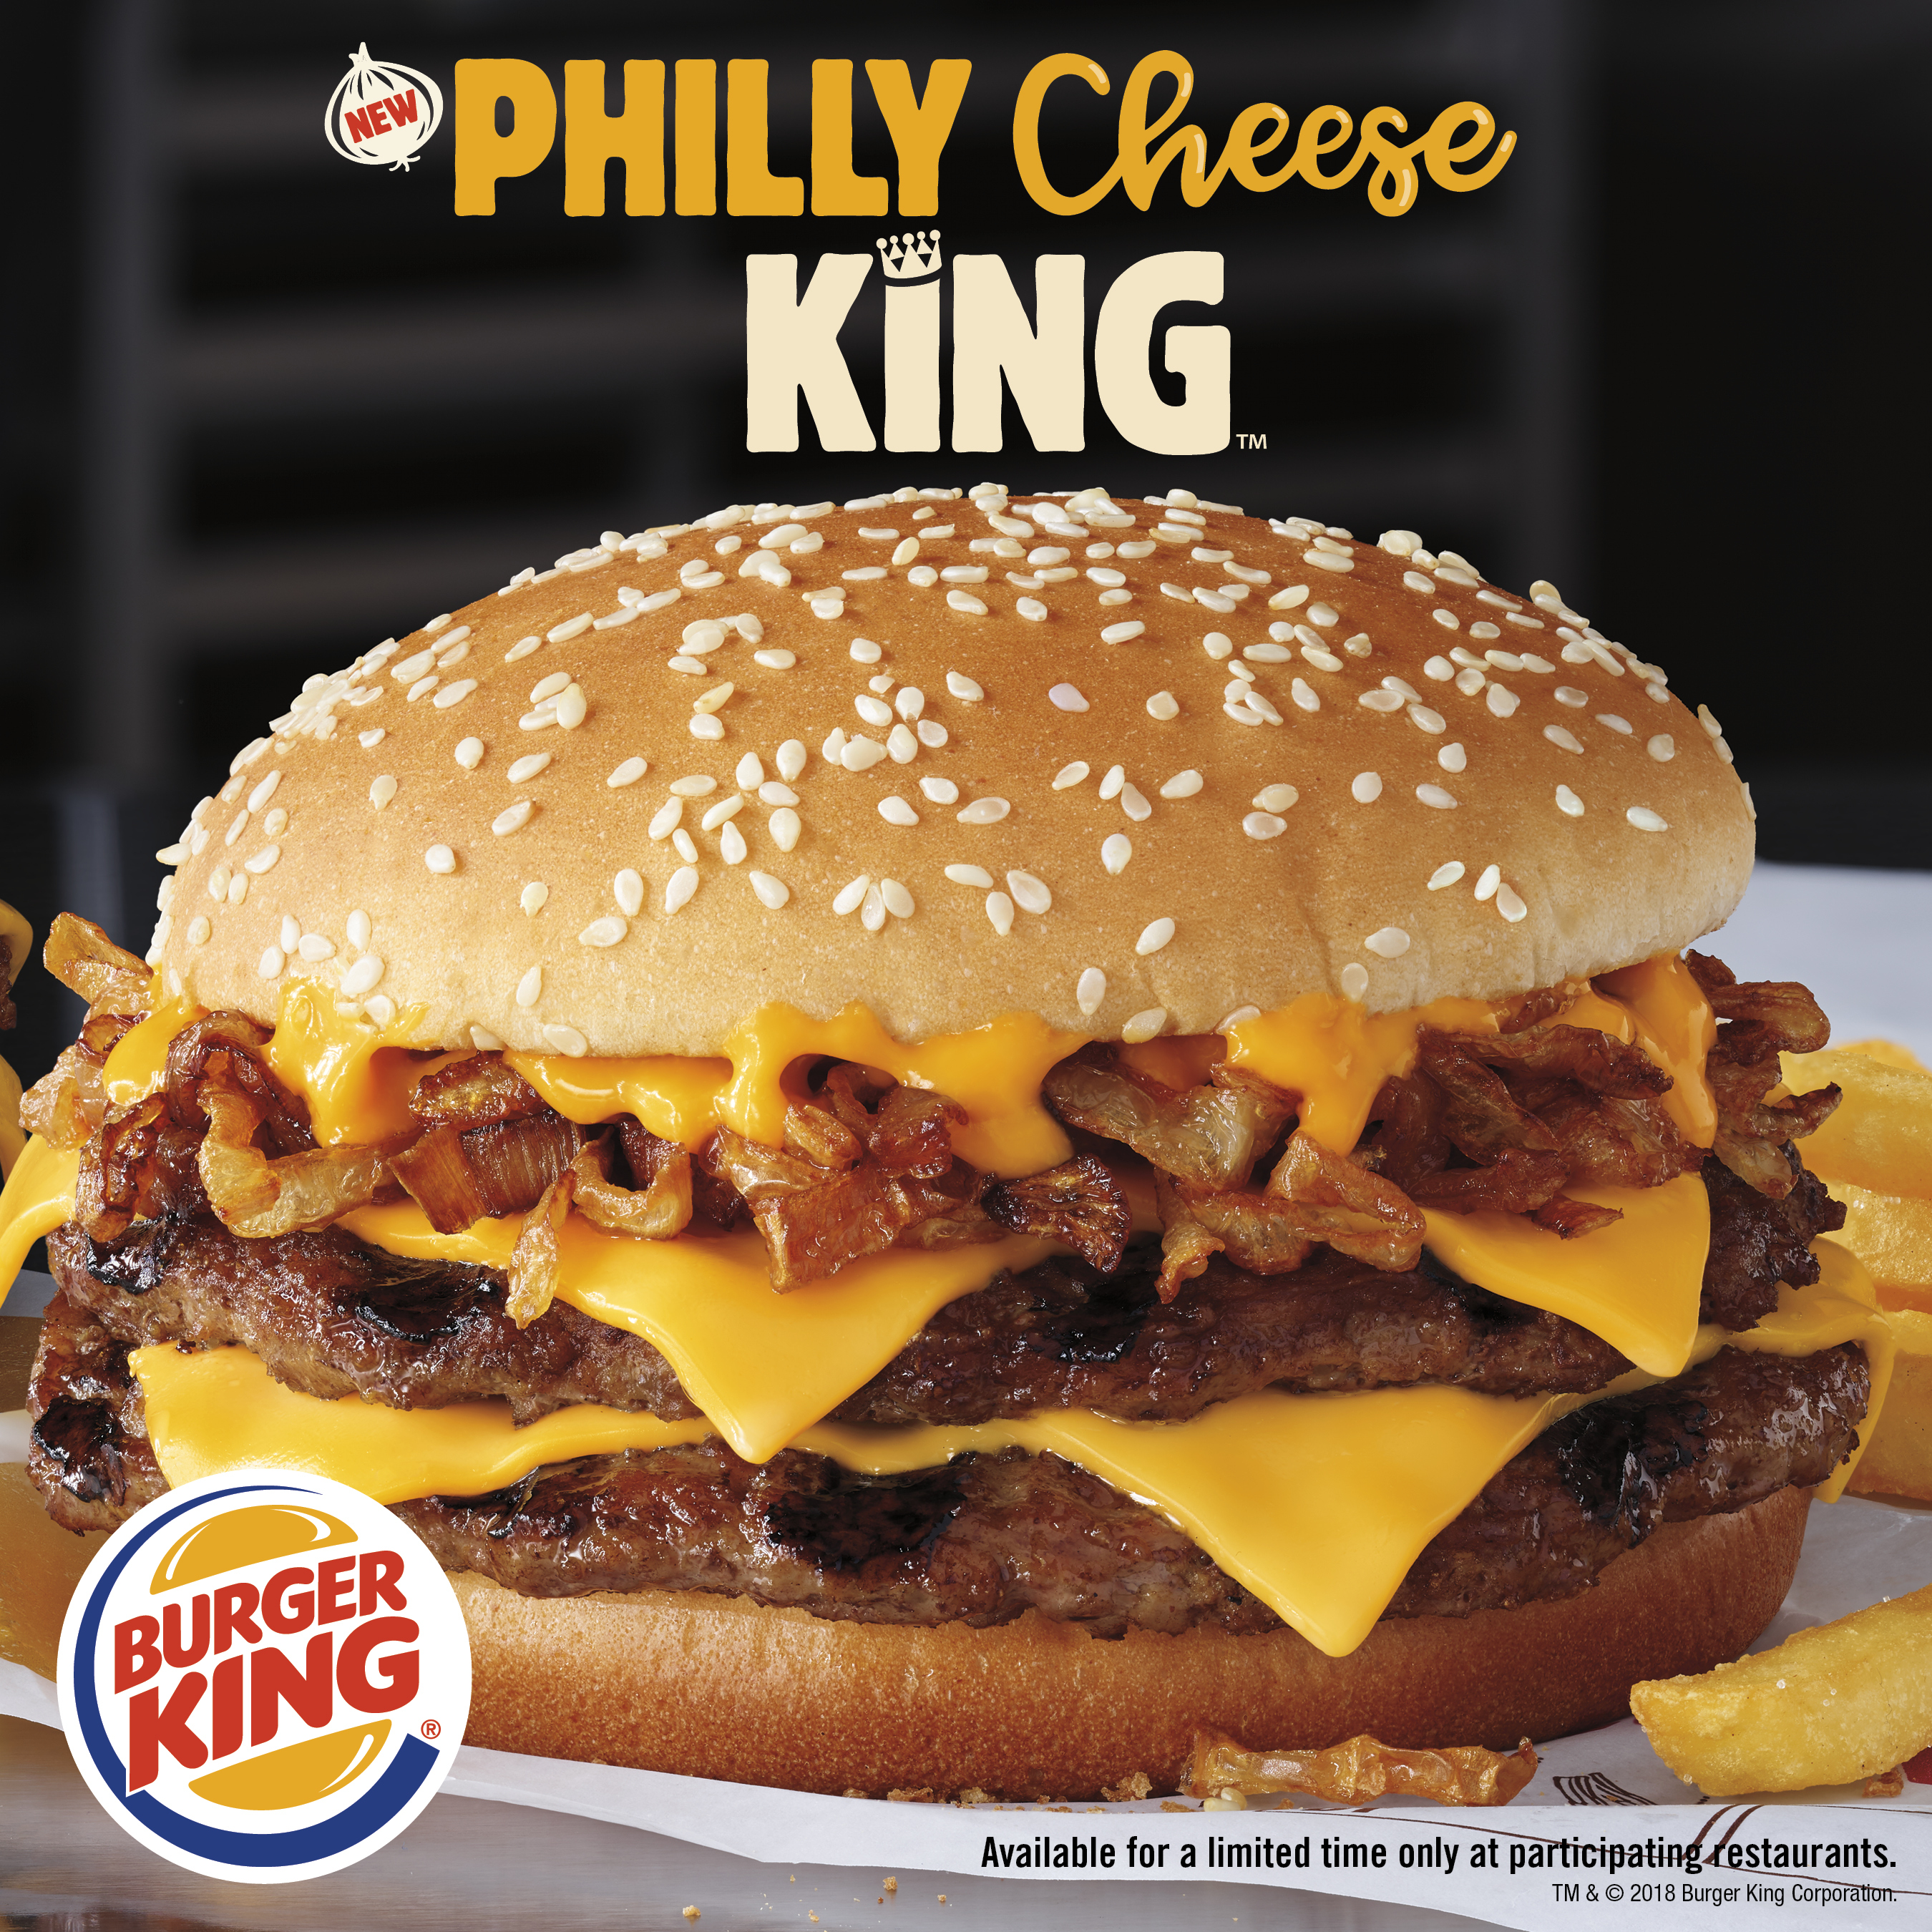 What Kind Of Cheese Does Burger King Use?